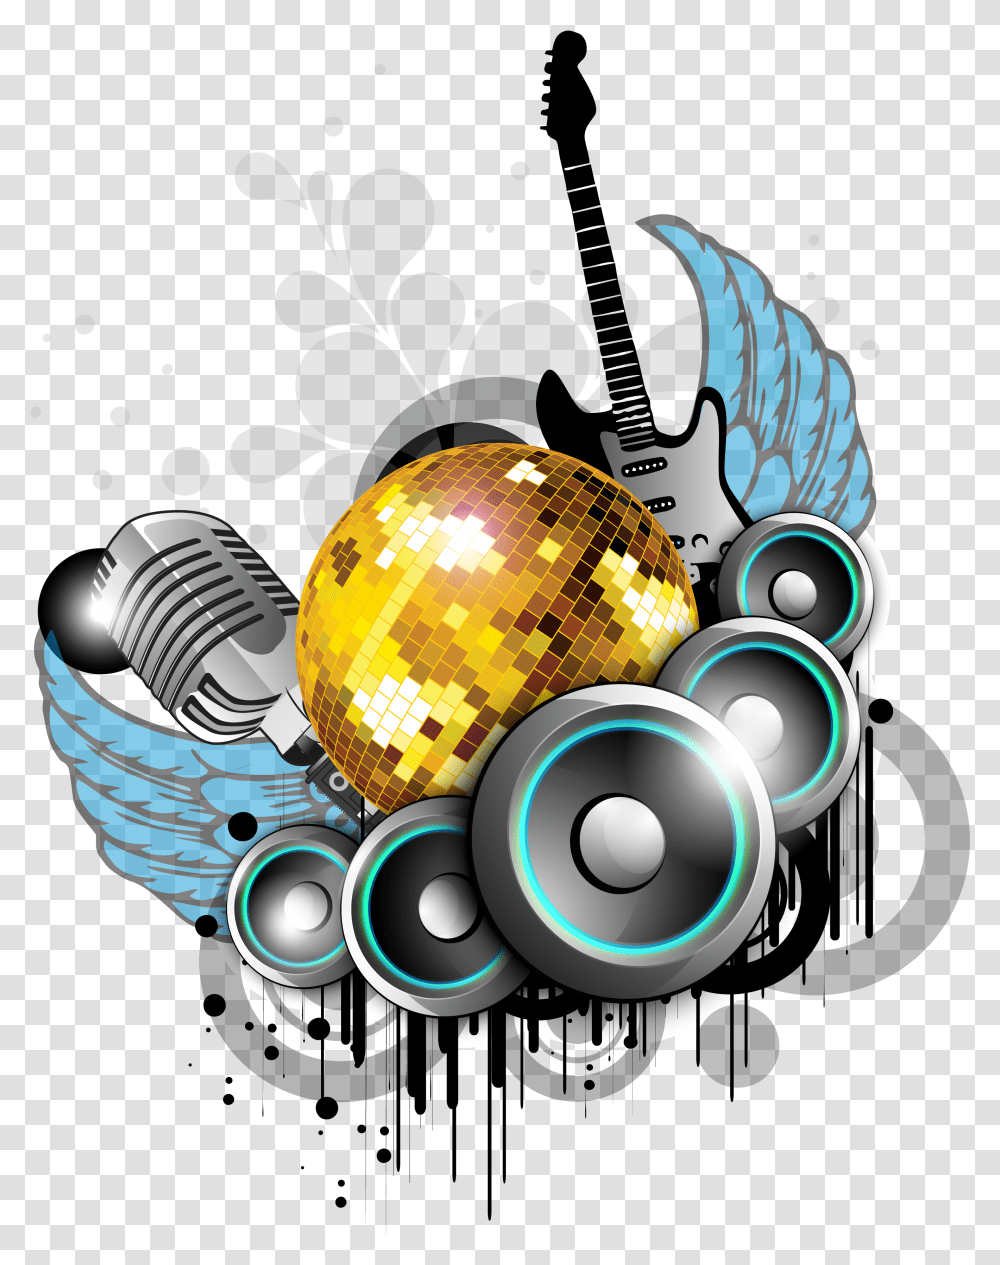 Hd Nightclub Background Music Party Background Musik Vektor, Graphics, Sphere, Floral Design, Pattern Transparent Png